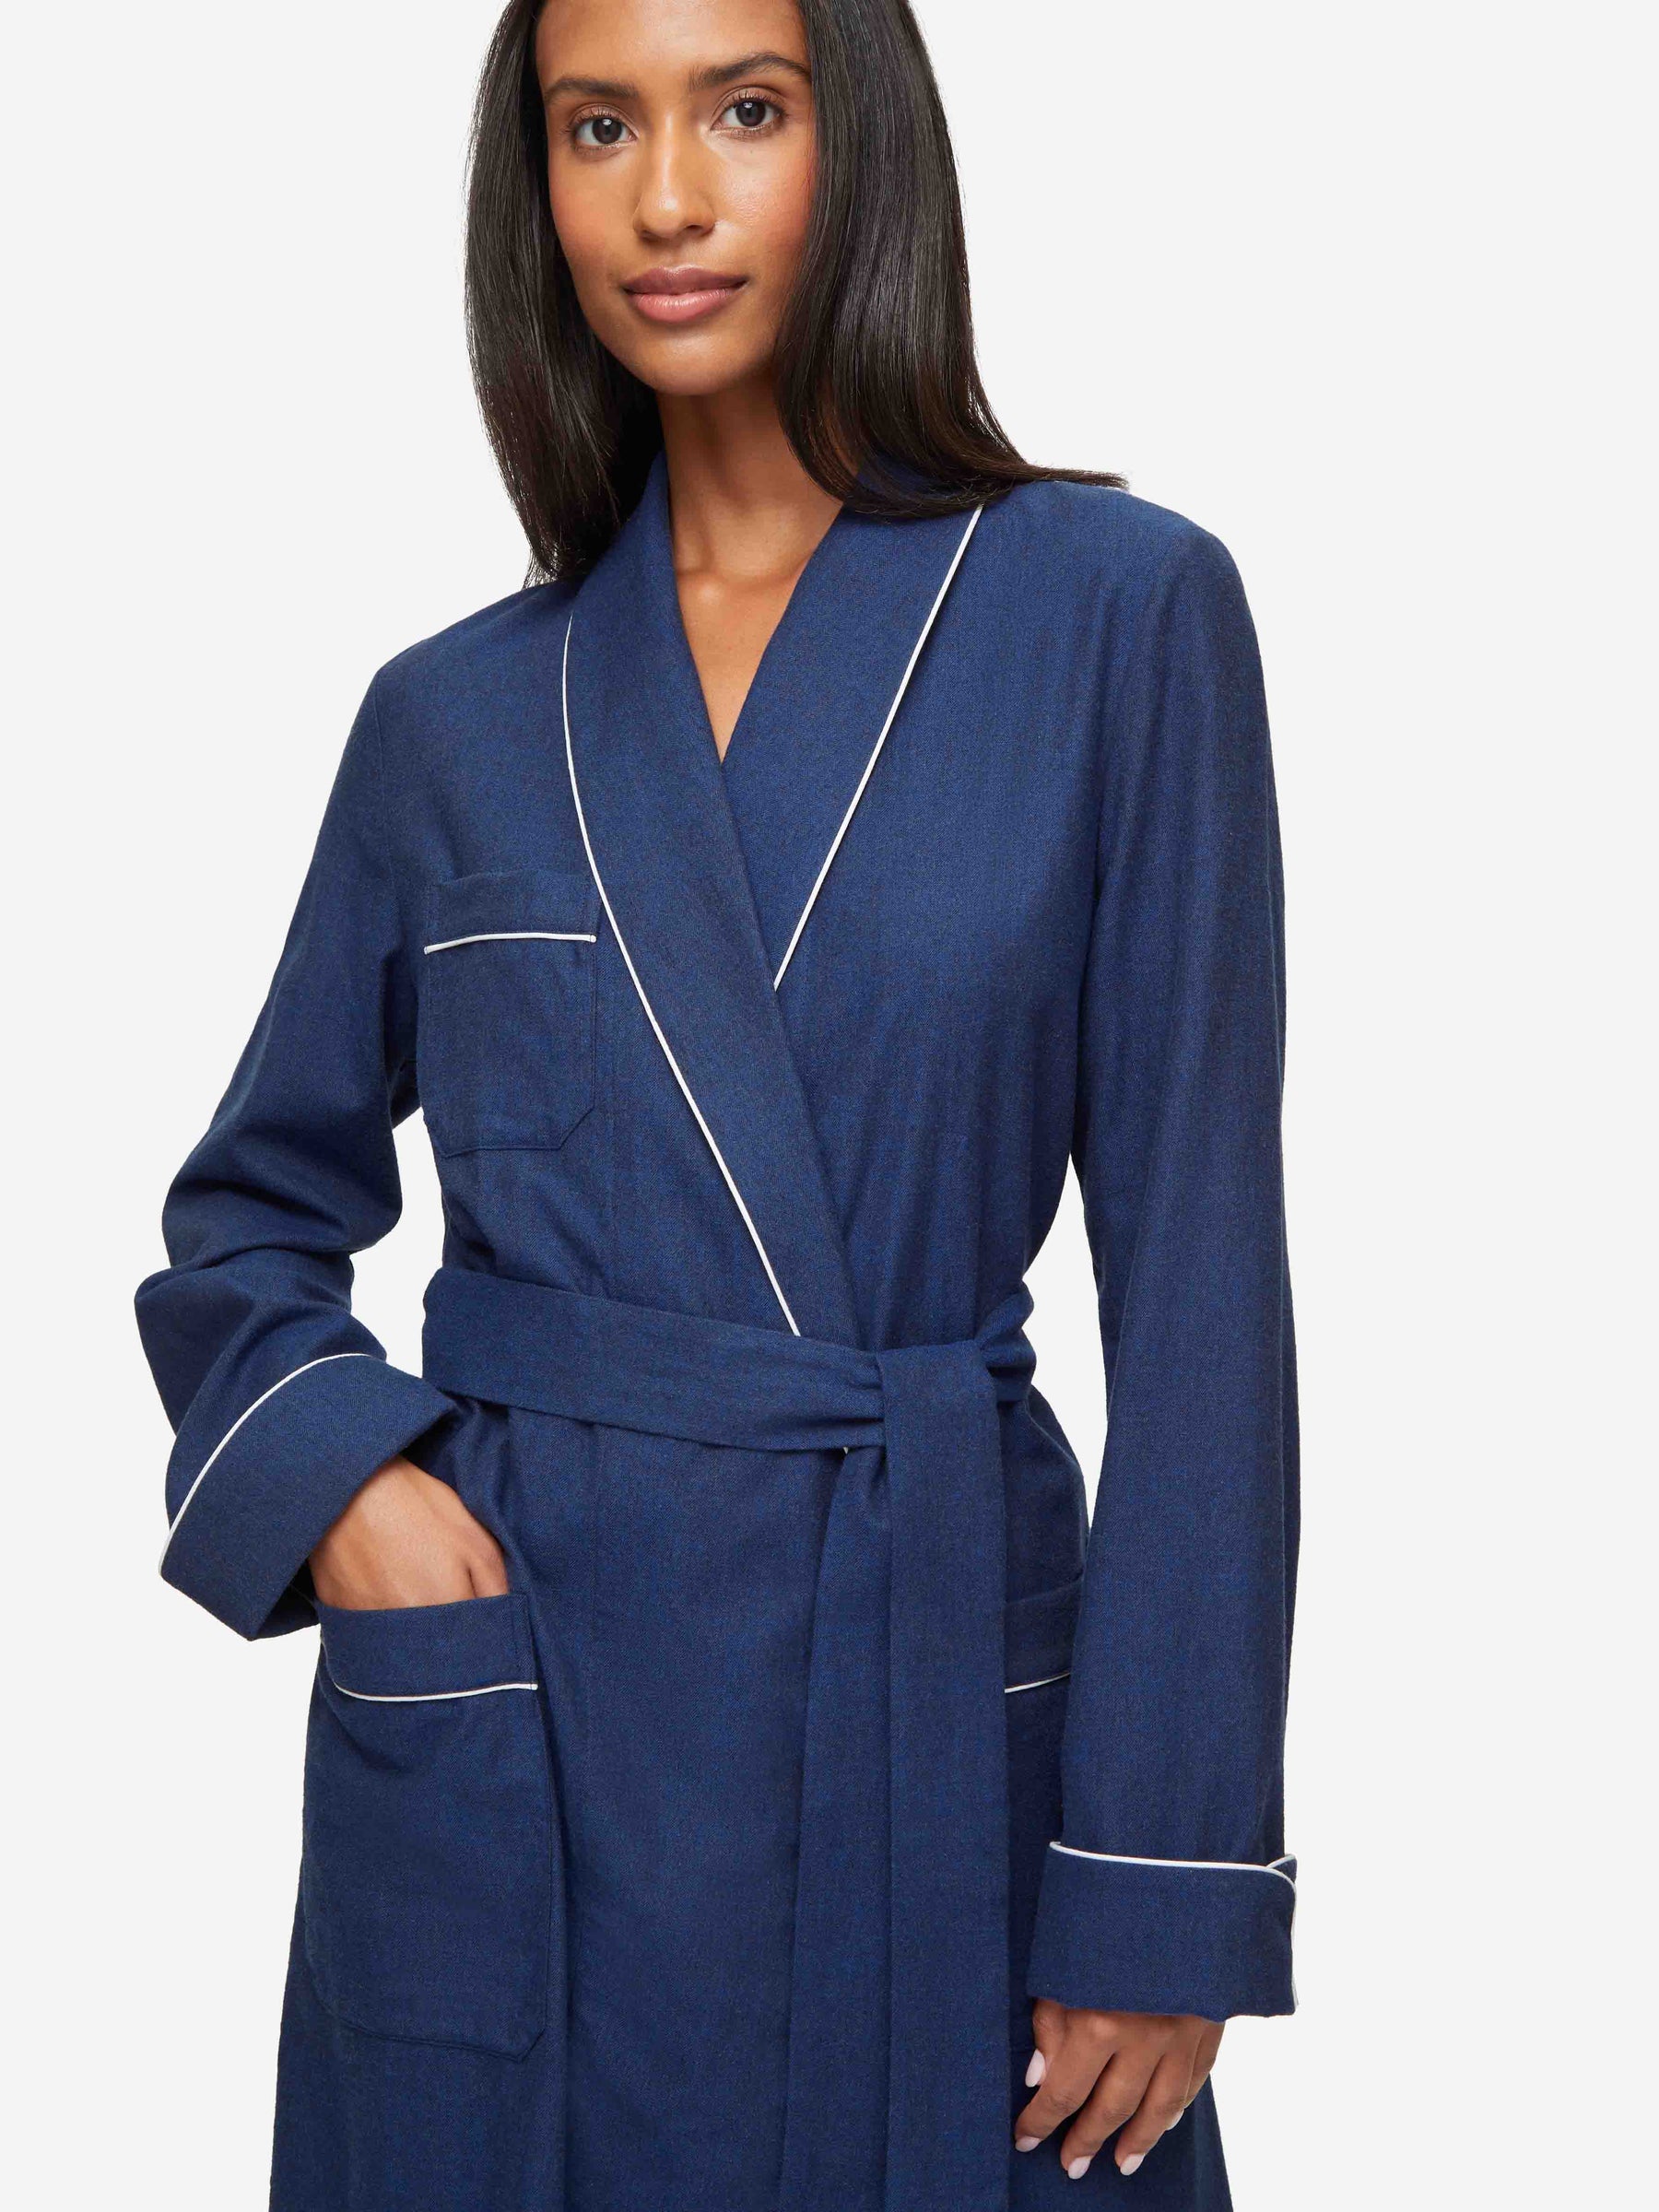 Women's Long Dressing Gown Balmoral 3 Brushed Cotton Navy